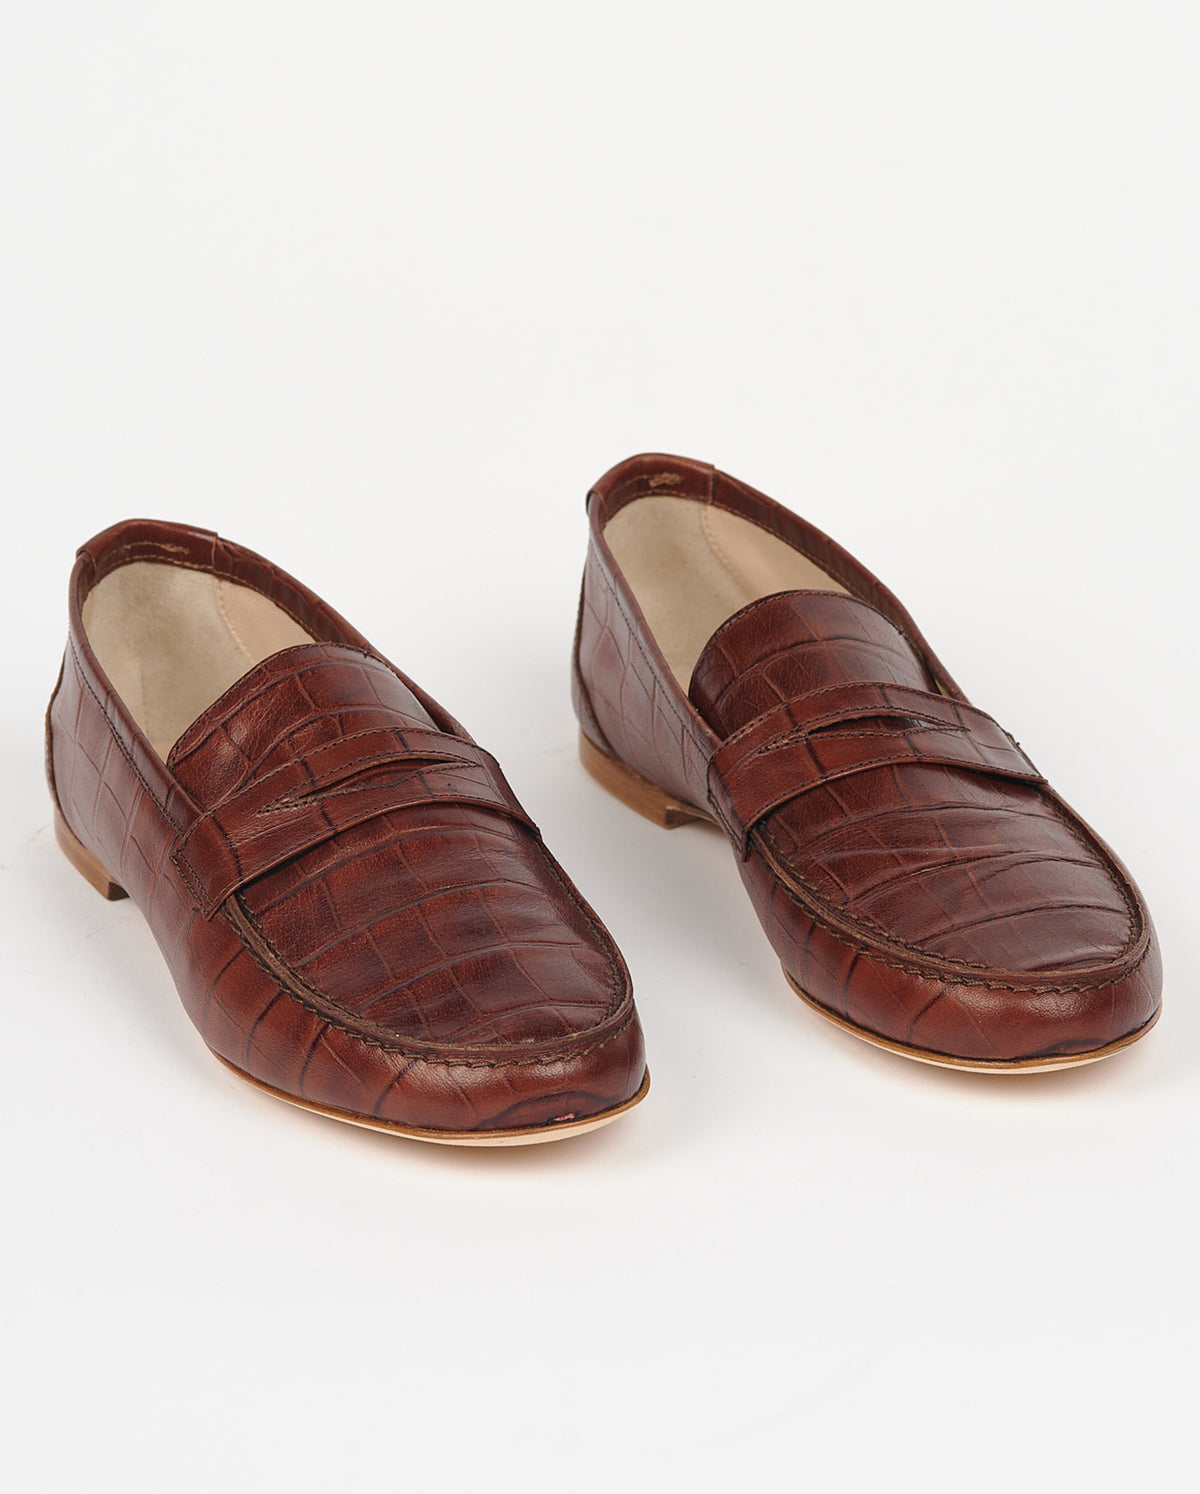 The Penny Loafer - Croc Brown